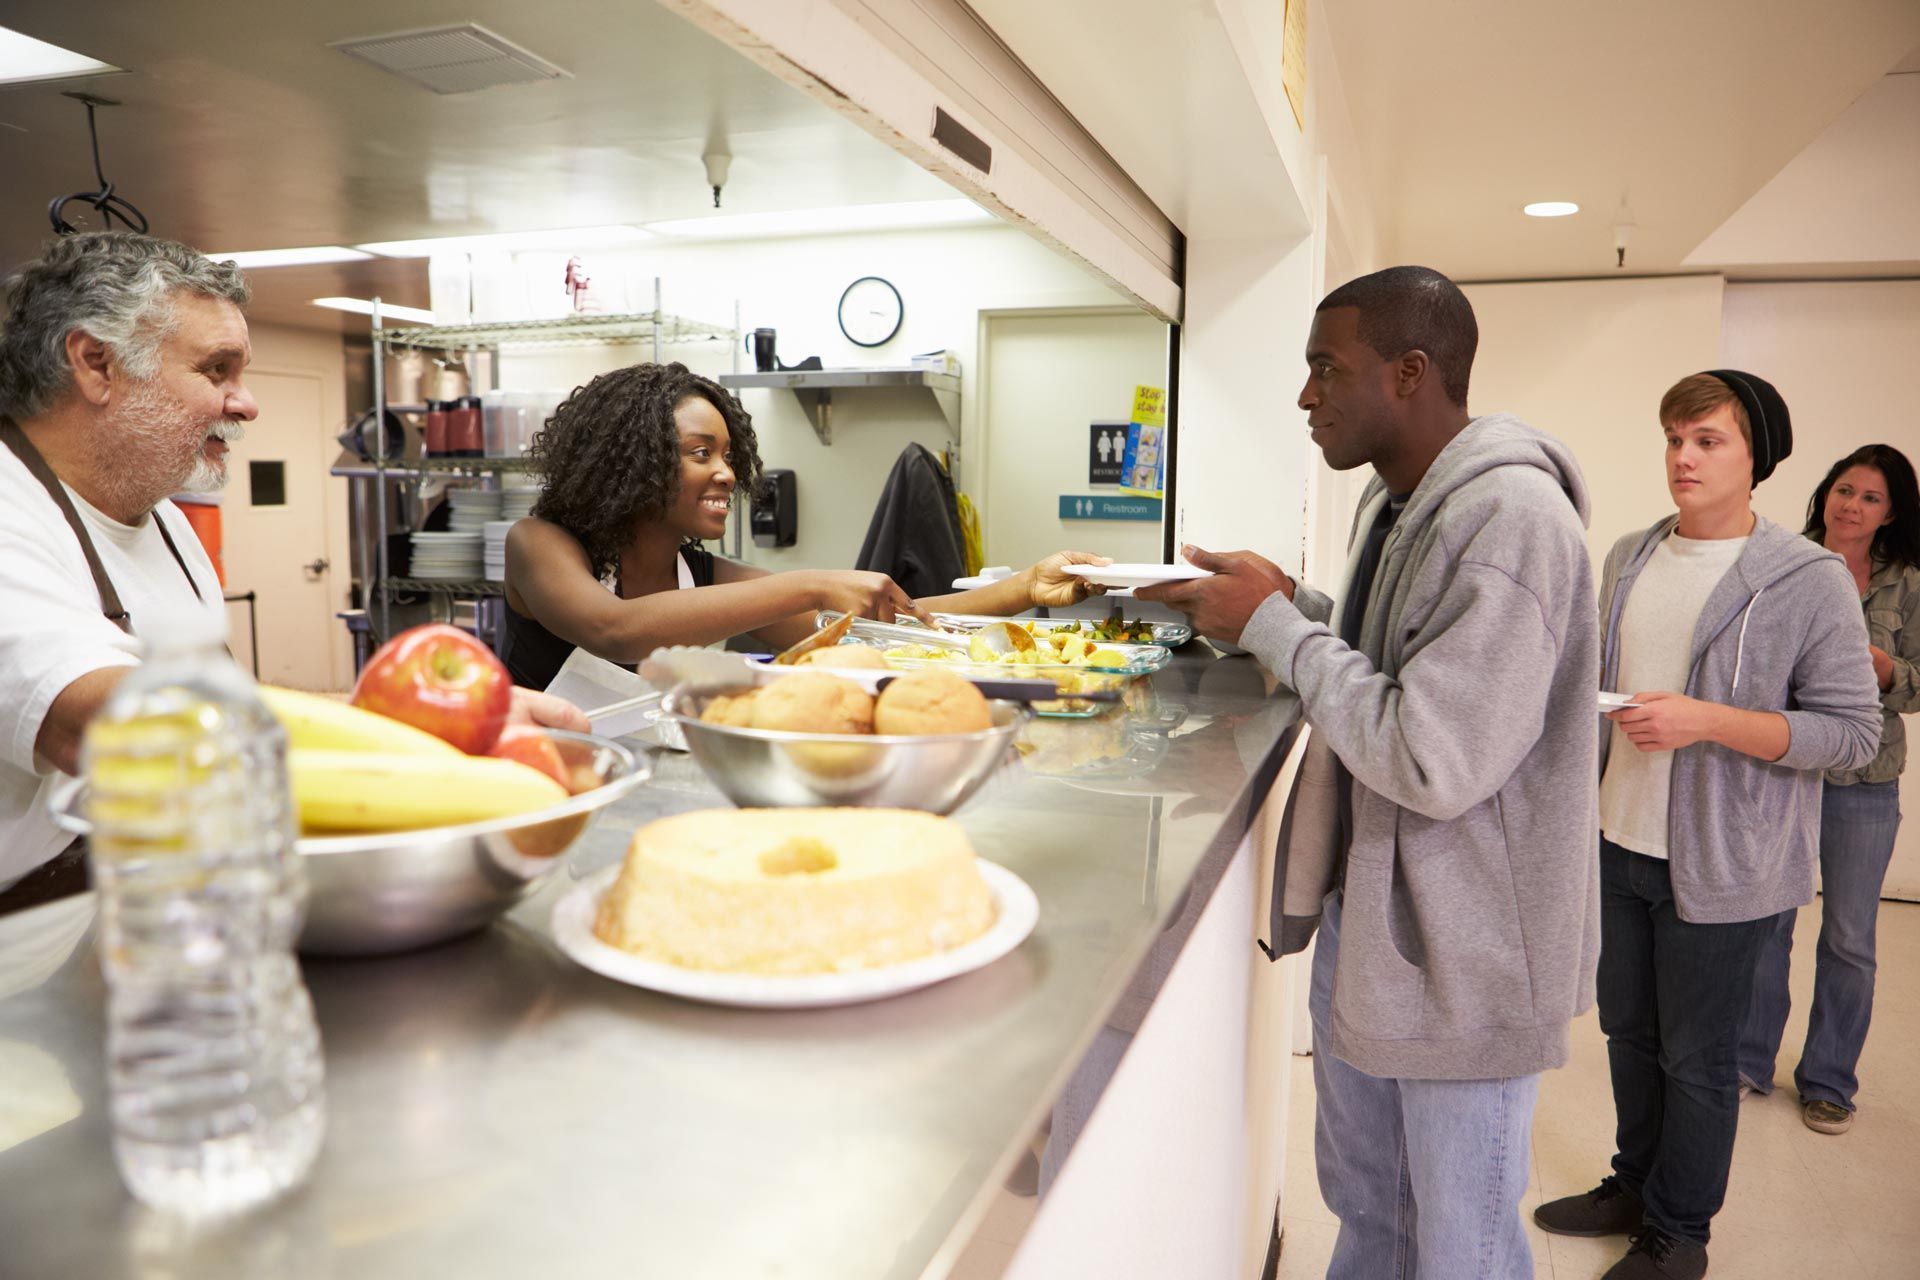 a man in a grey sweatshirt is getting food from a woman in a white apron